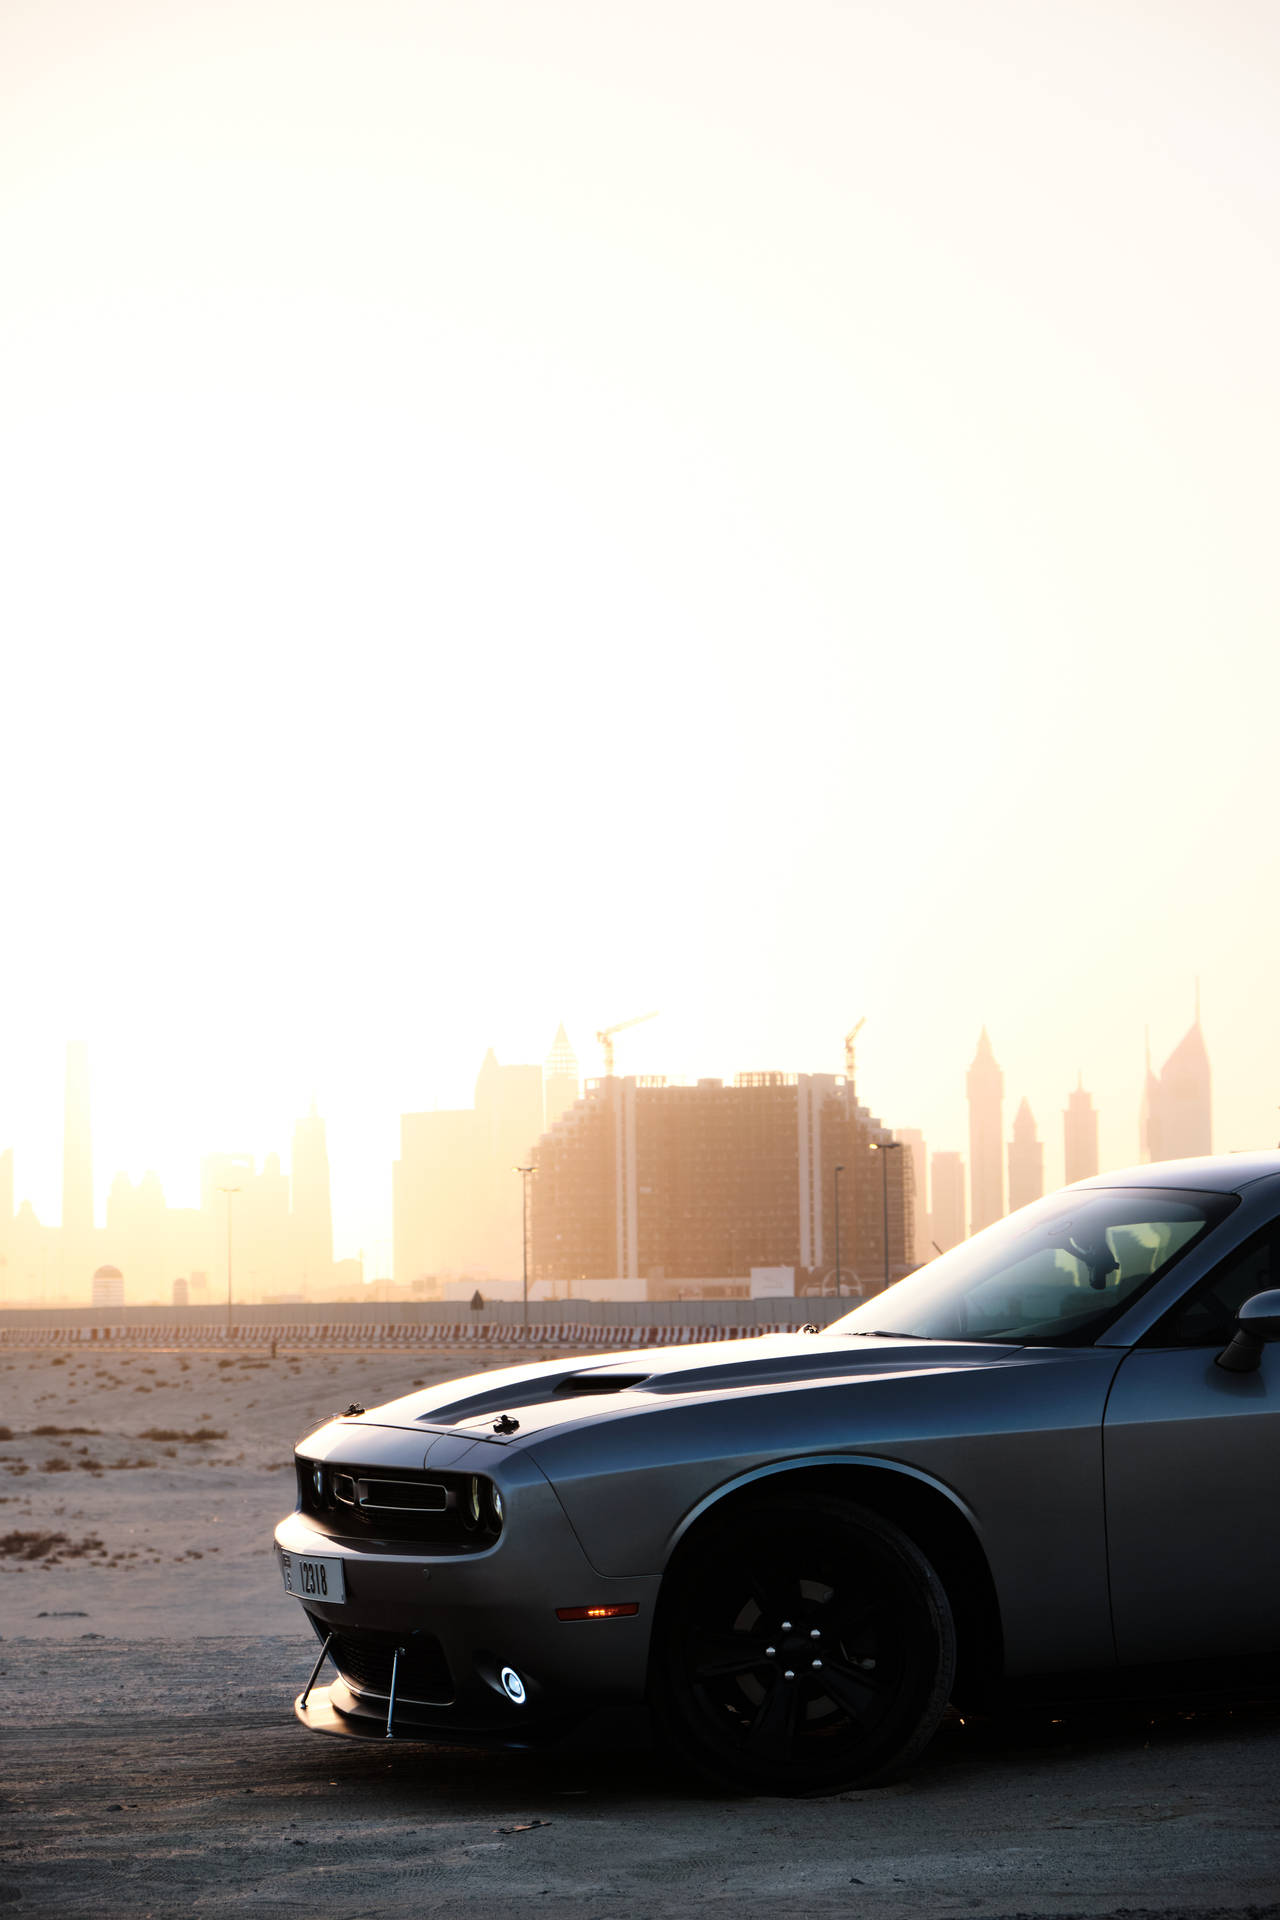 Dodge Challenger By The Sunlight Wallpaper